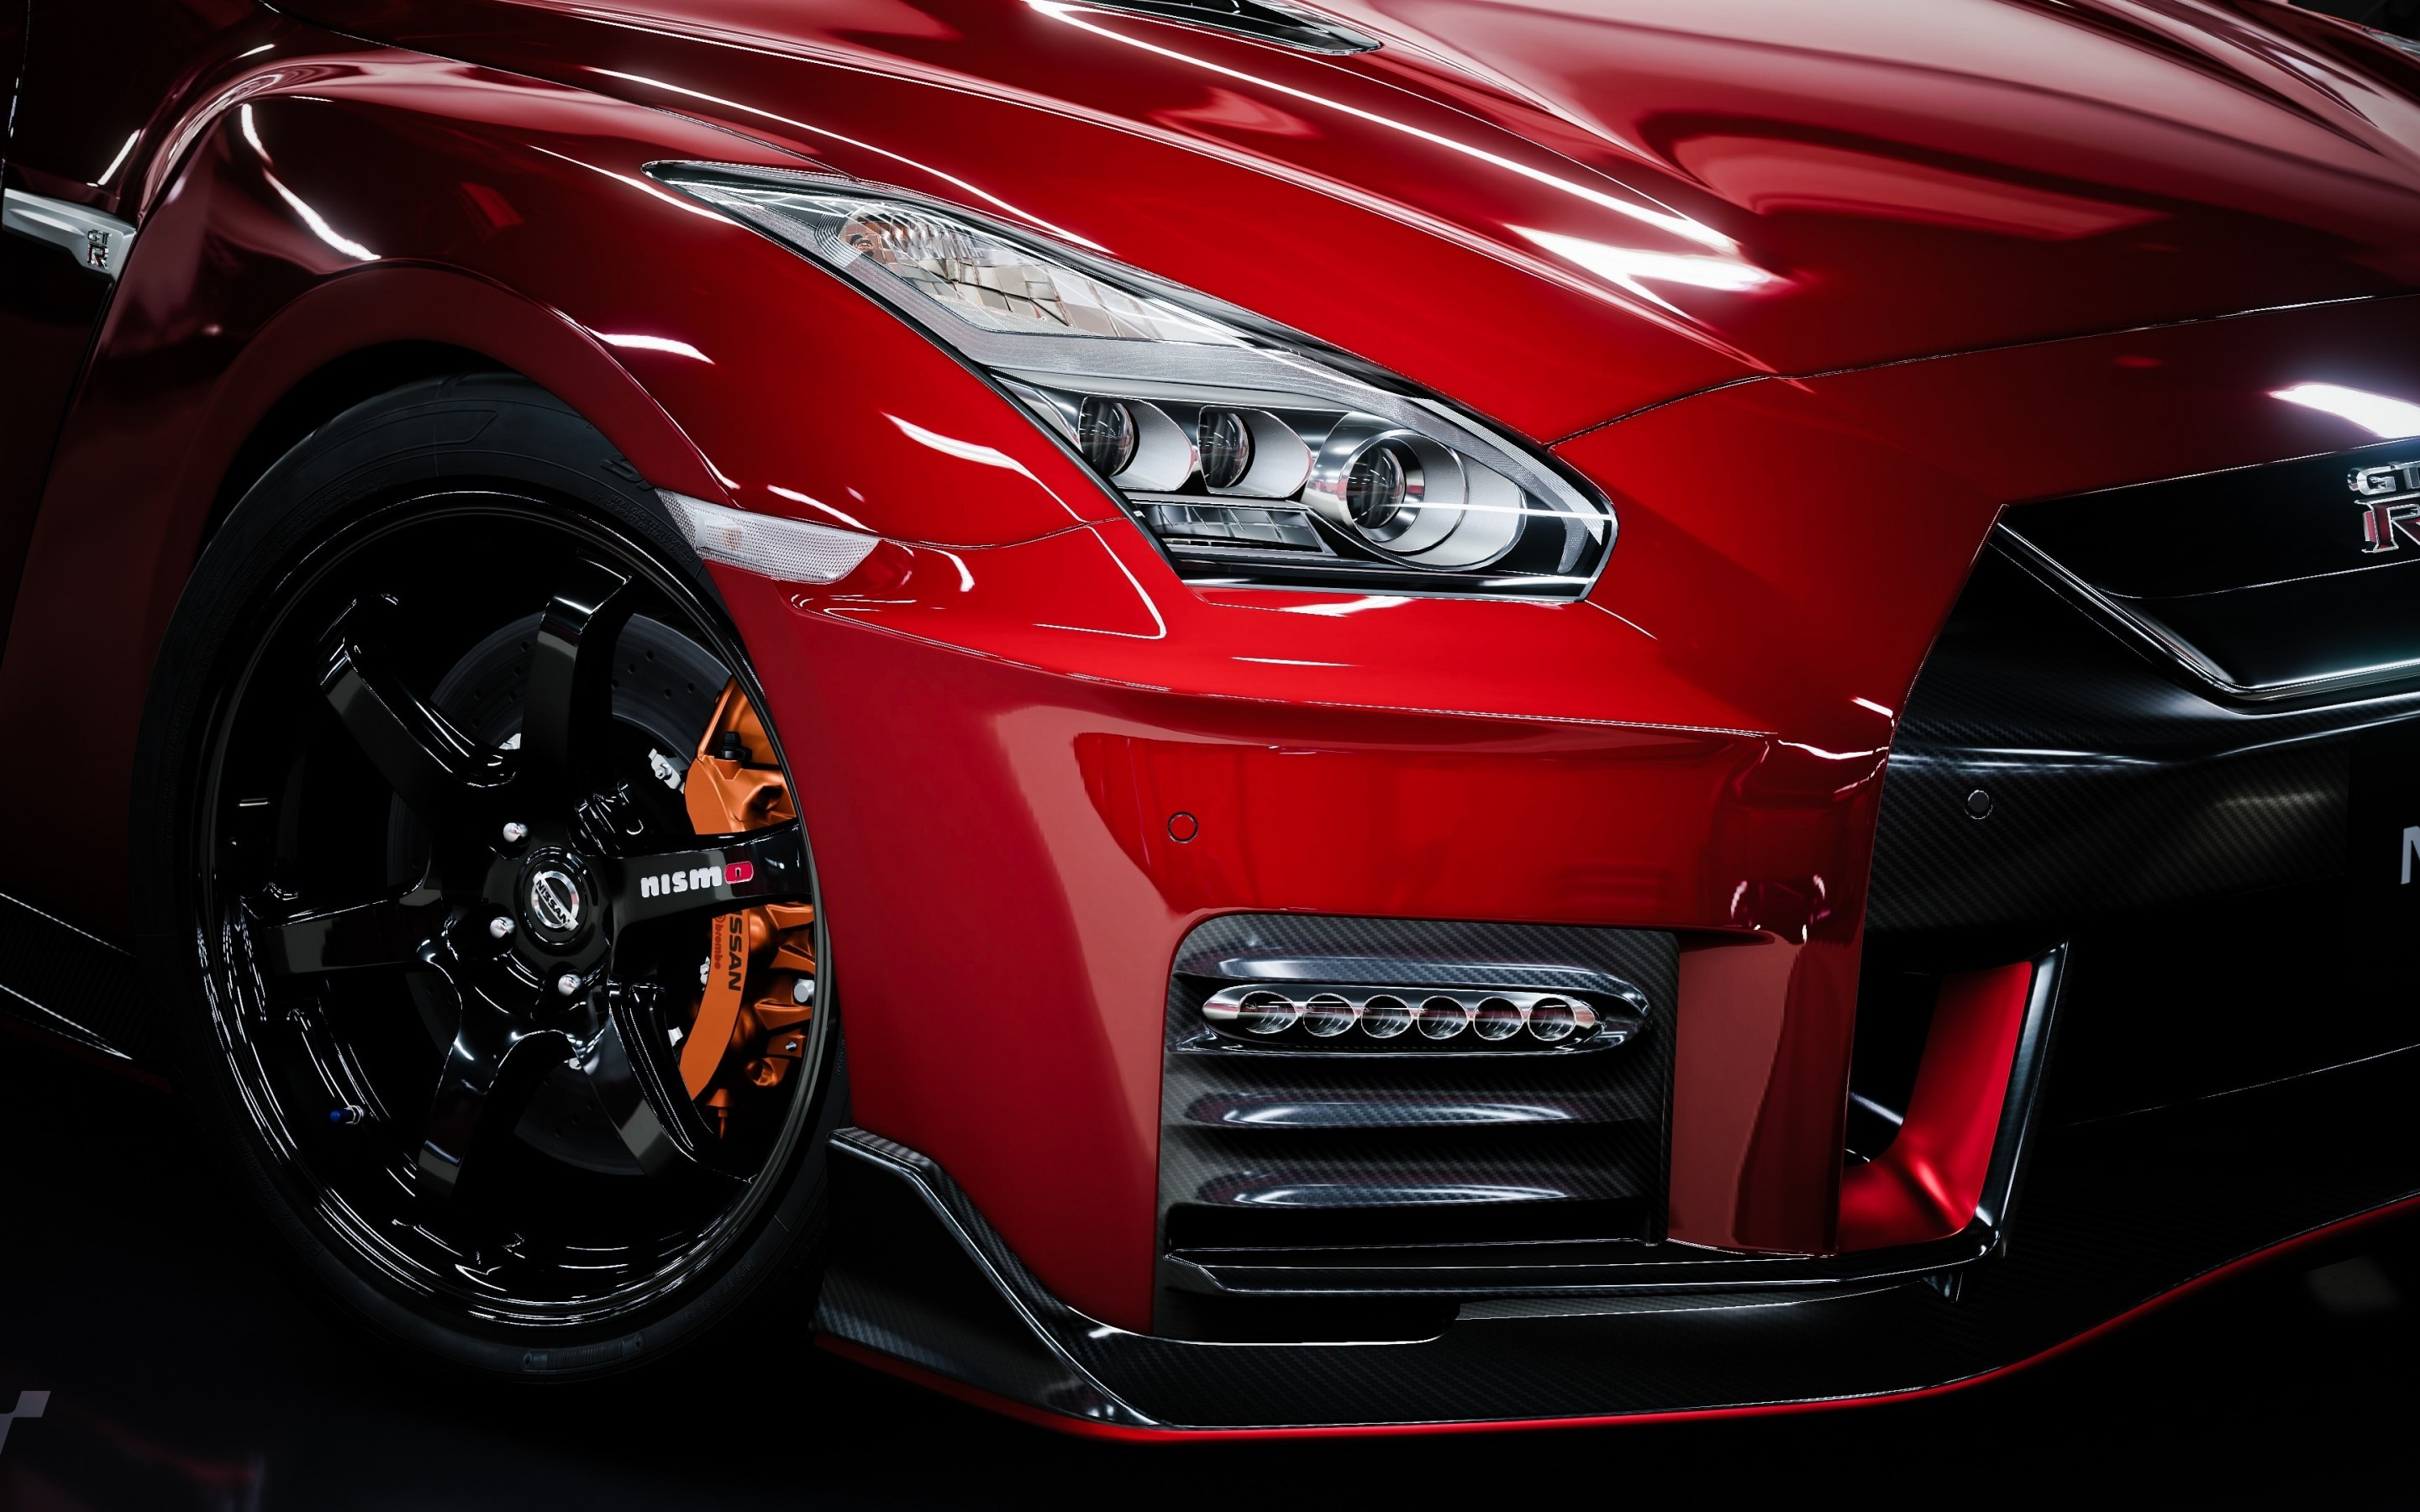 Download 2880x1800 Nissan Gtr, Front View, Headlights, Red, Sport Cars Wallpaper for MacBook Pro 15 inch